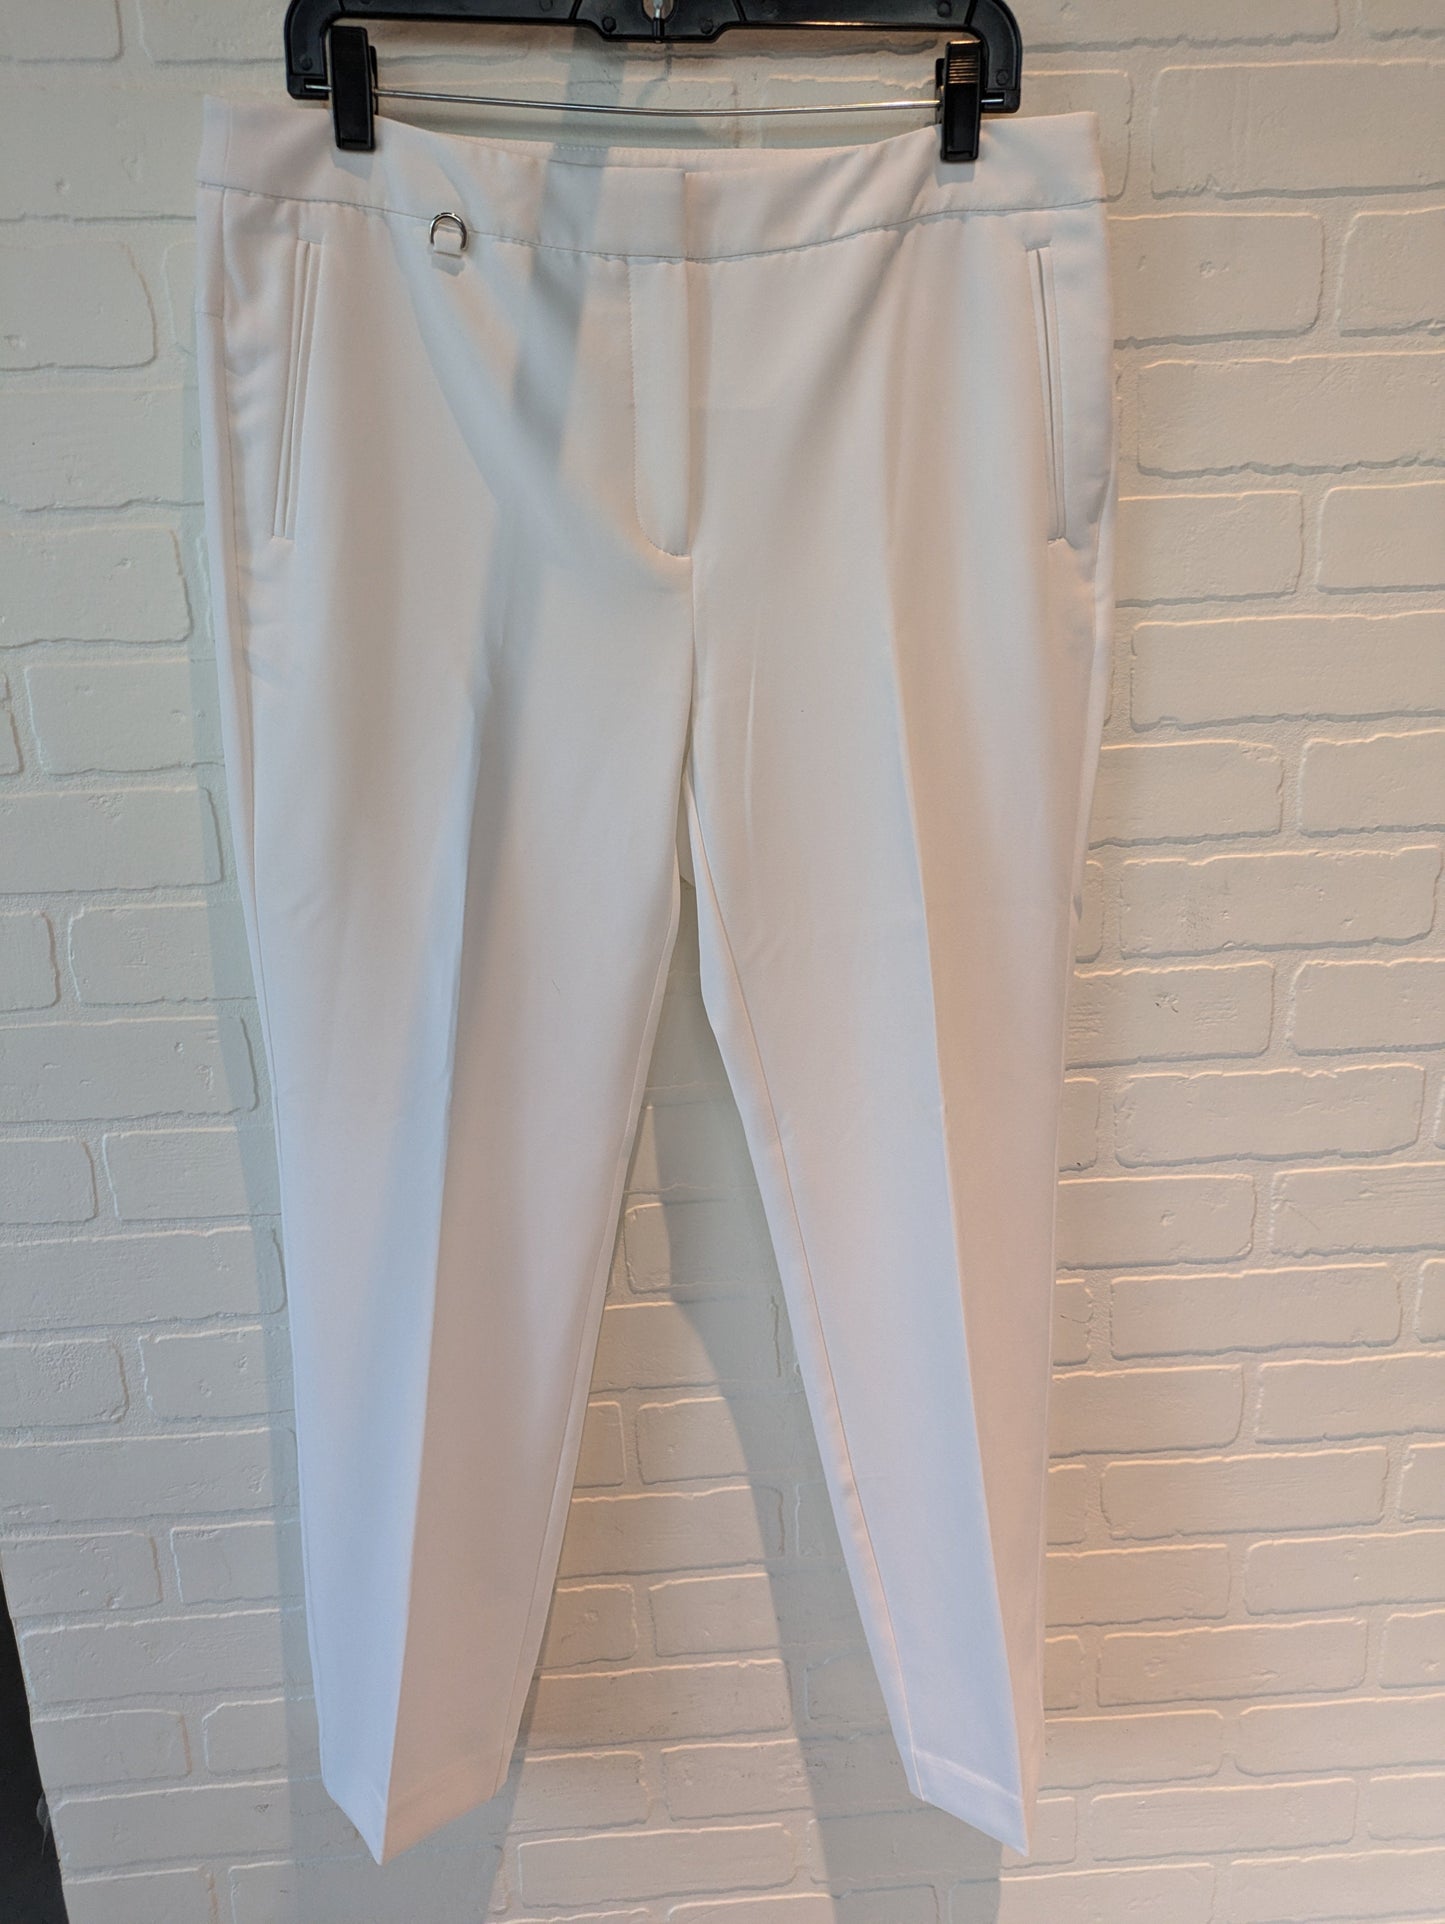 White Pants Dress Adrianna Papell, Size 12